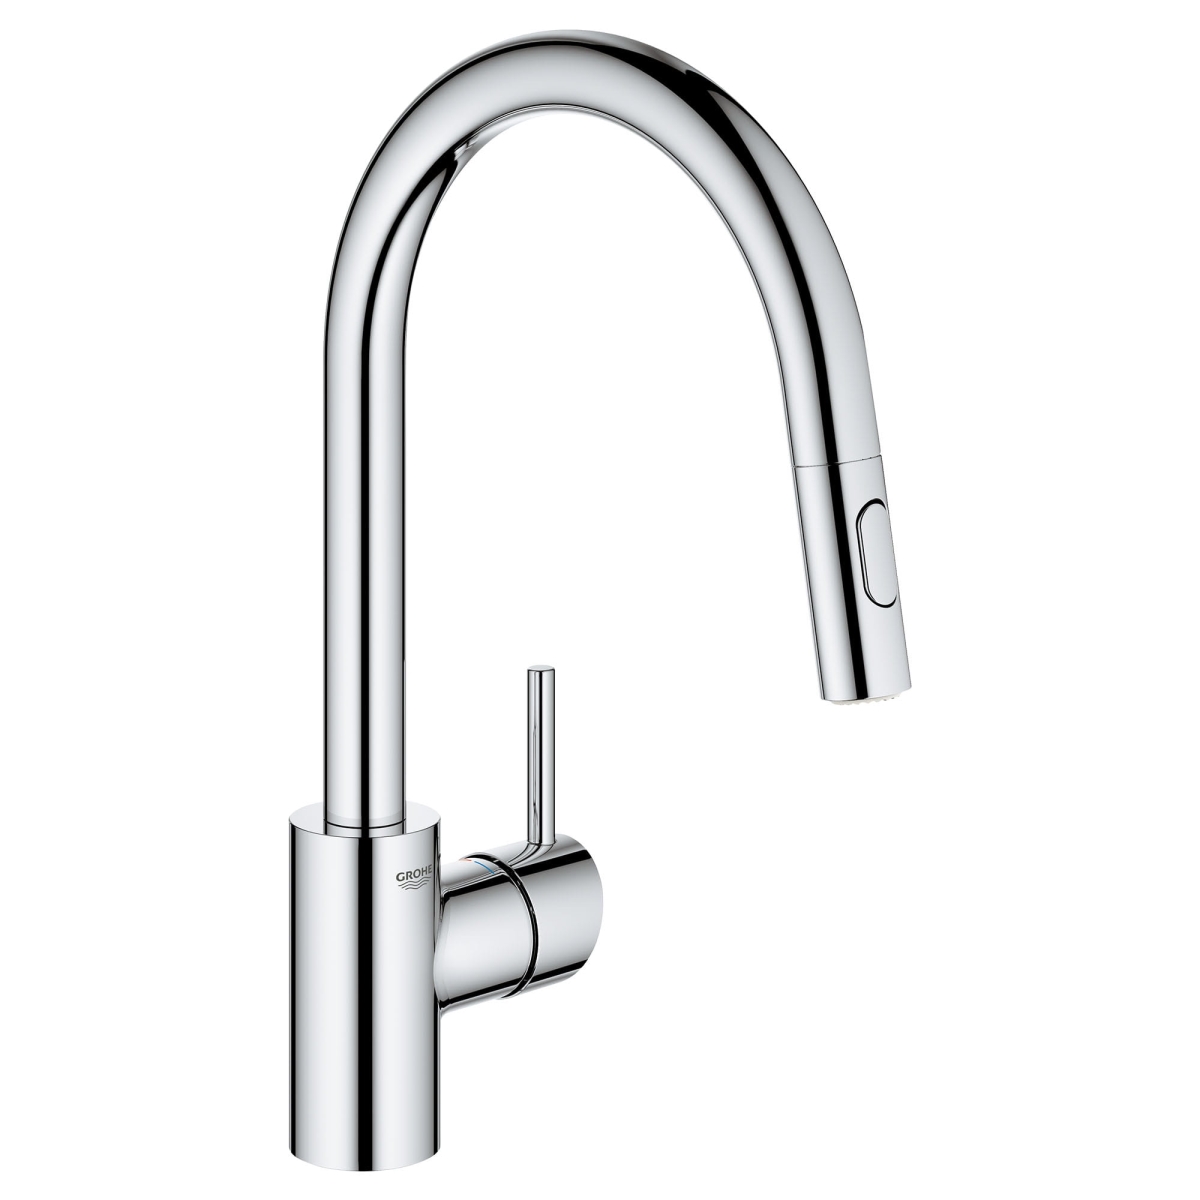 GROHE AMERICA, INC Grohe 32665003 1.75 GPM Concetto Single-Handle Pull-Down Dual Spray Kitchen Faucet, Chrome